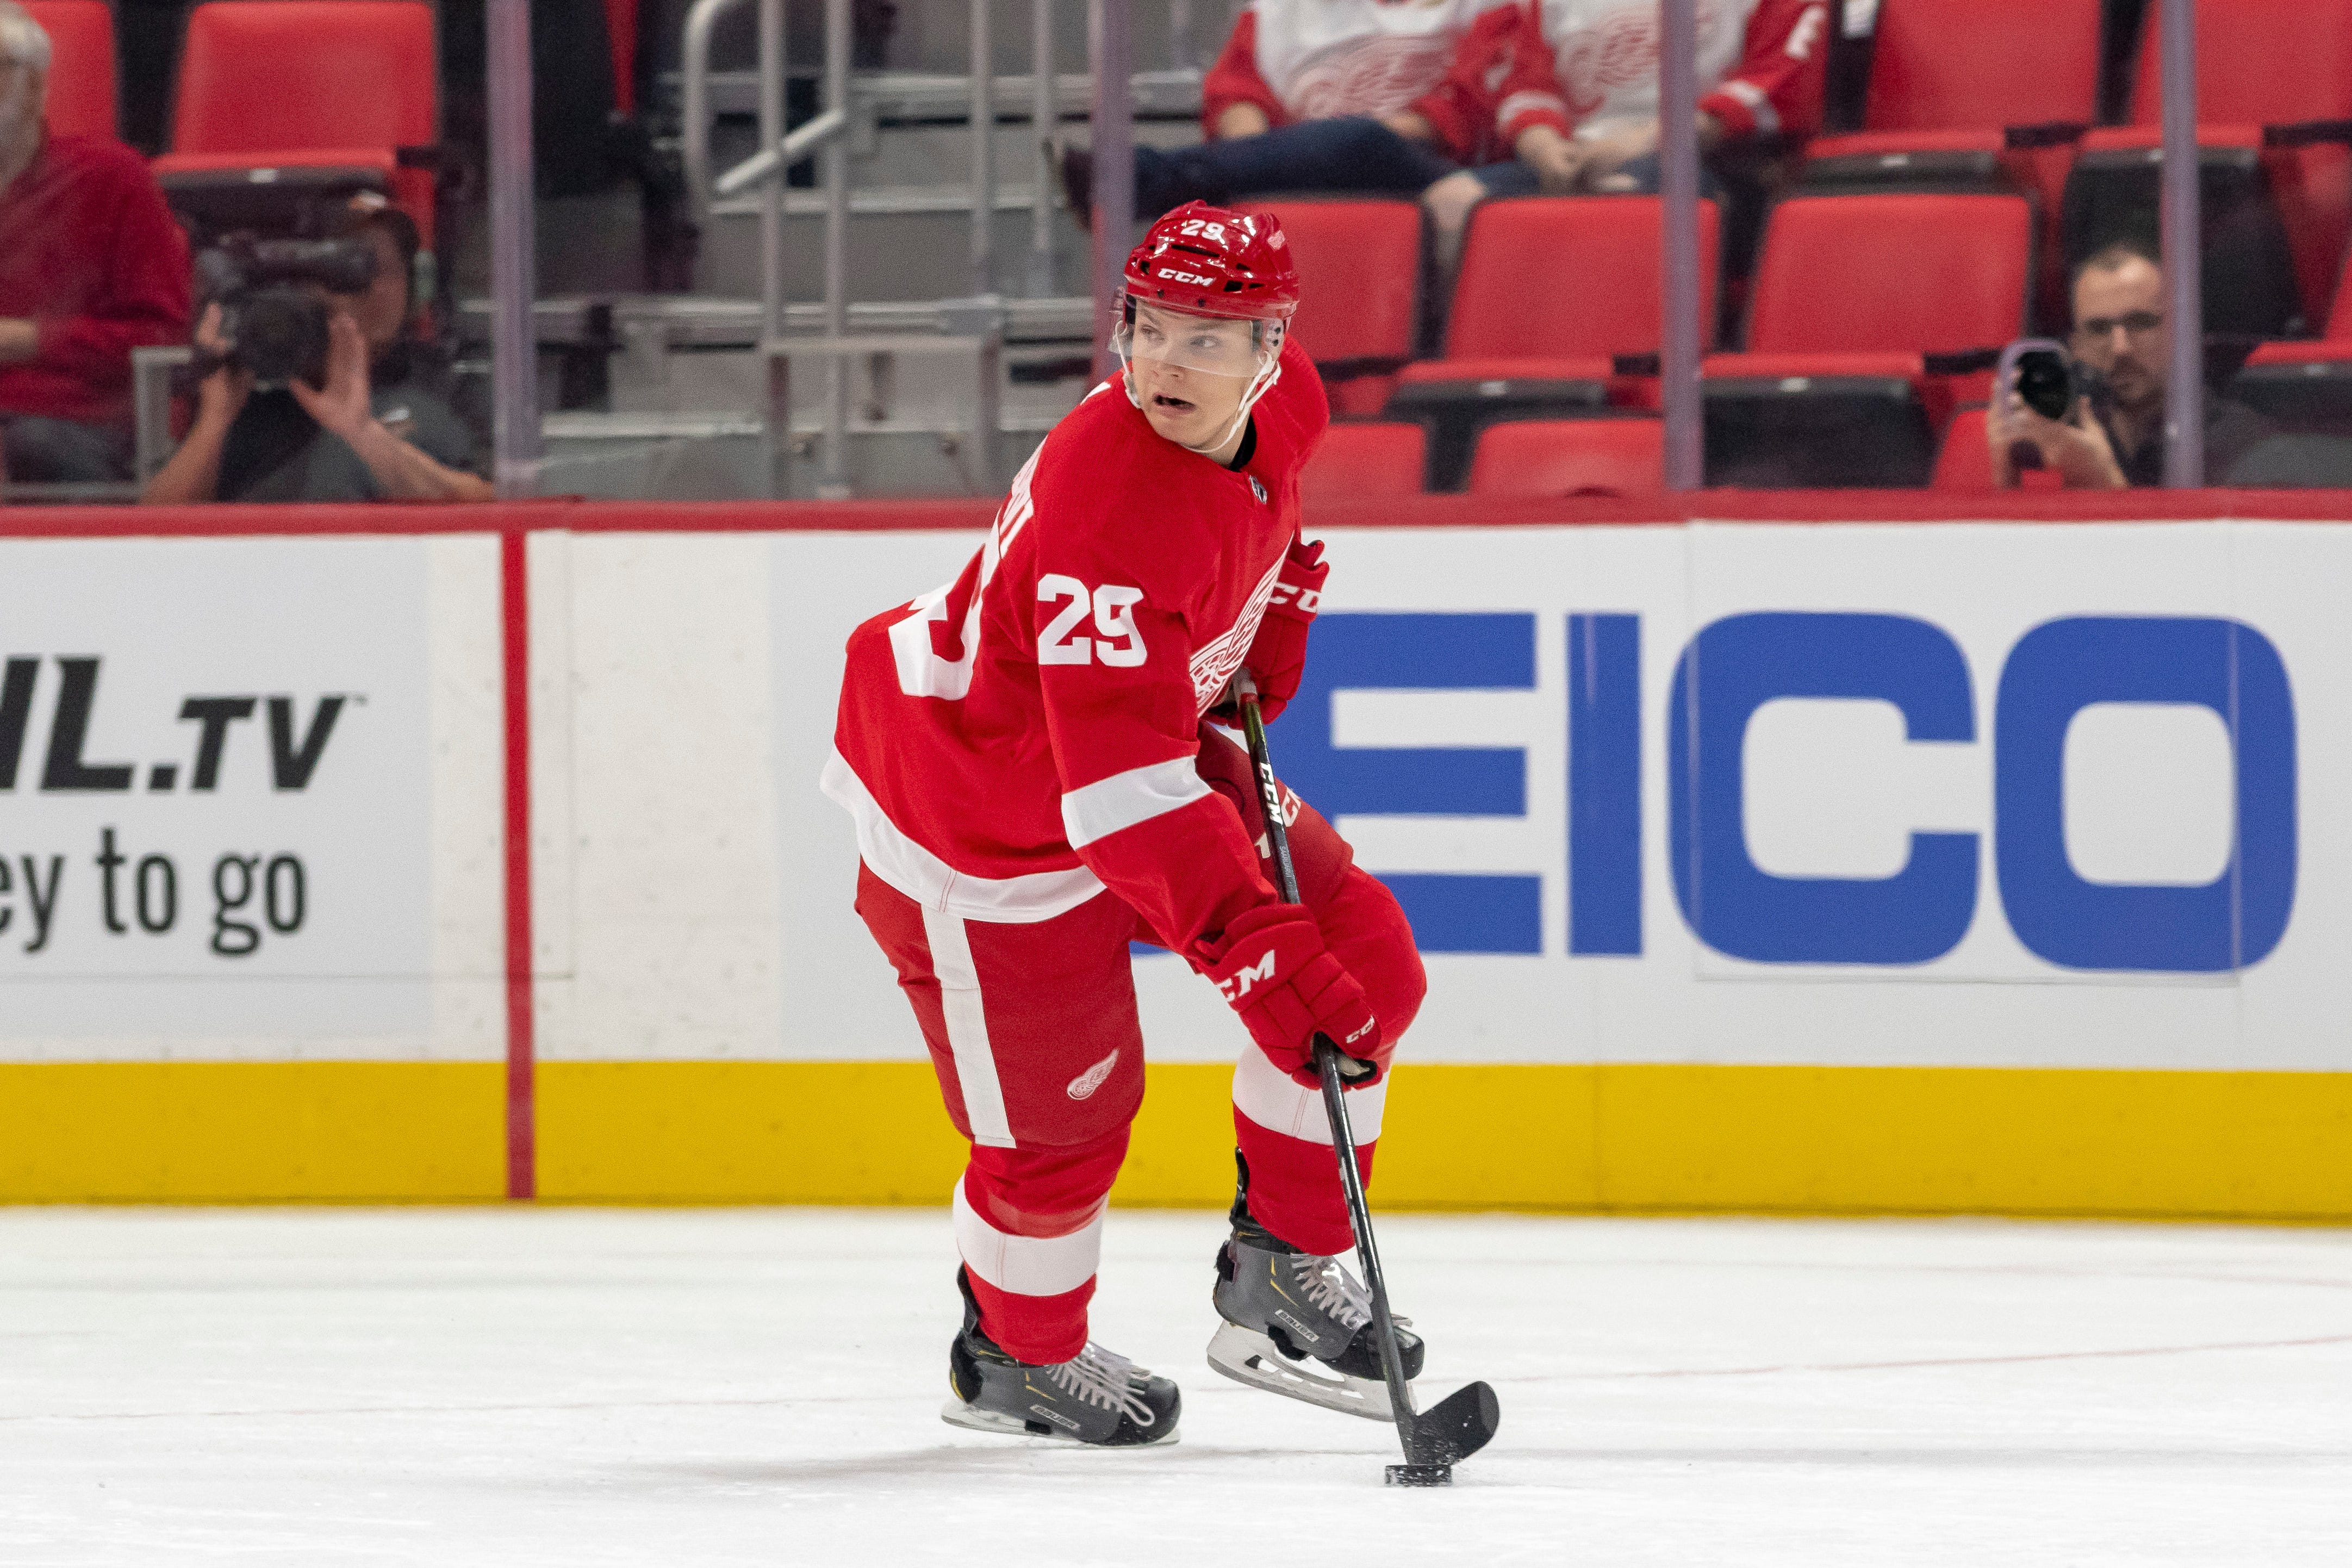 31. Vili Saarijarvi, defenseman. Interestingly, Saarijarvi was actually one of the better defensemen in Wings’ training camp. But, his season in Grand Rapids was up and down, though Saarijarvi’s ability with the puck remains an intriguing strength.